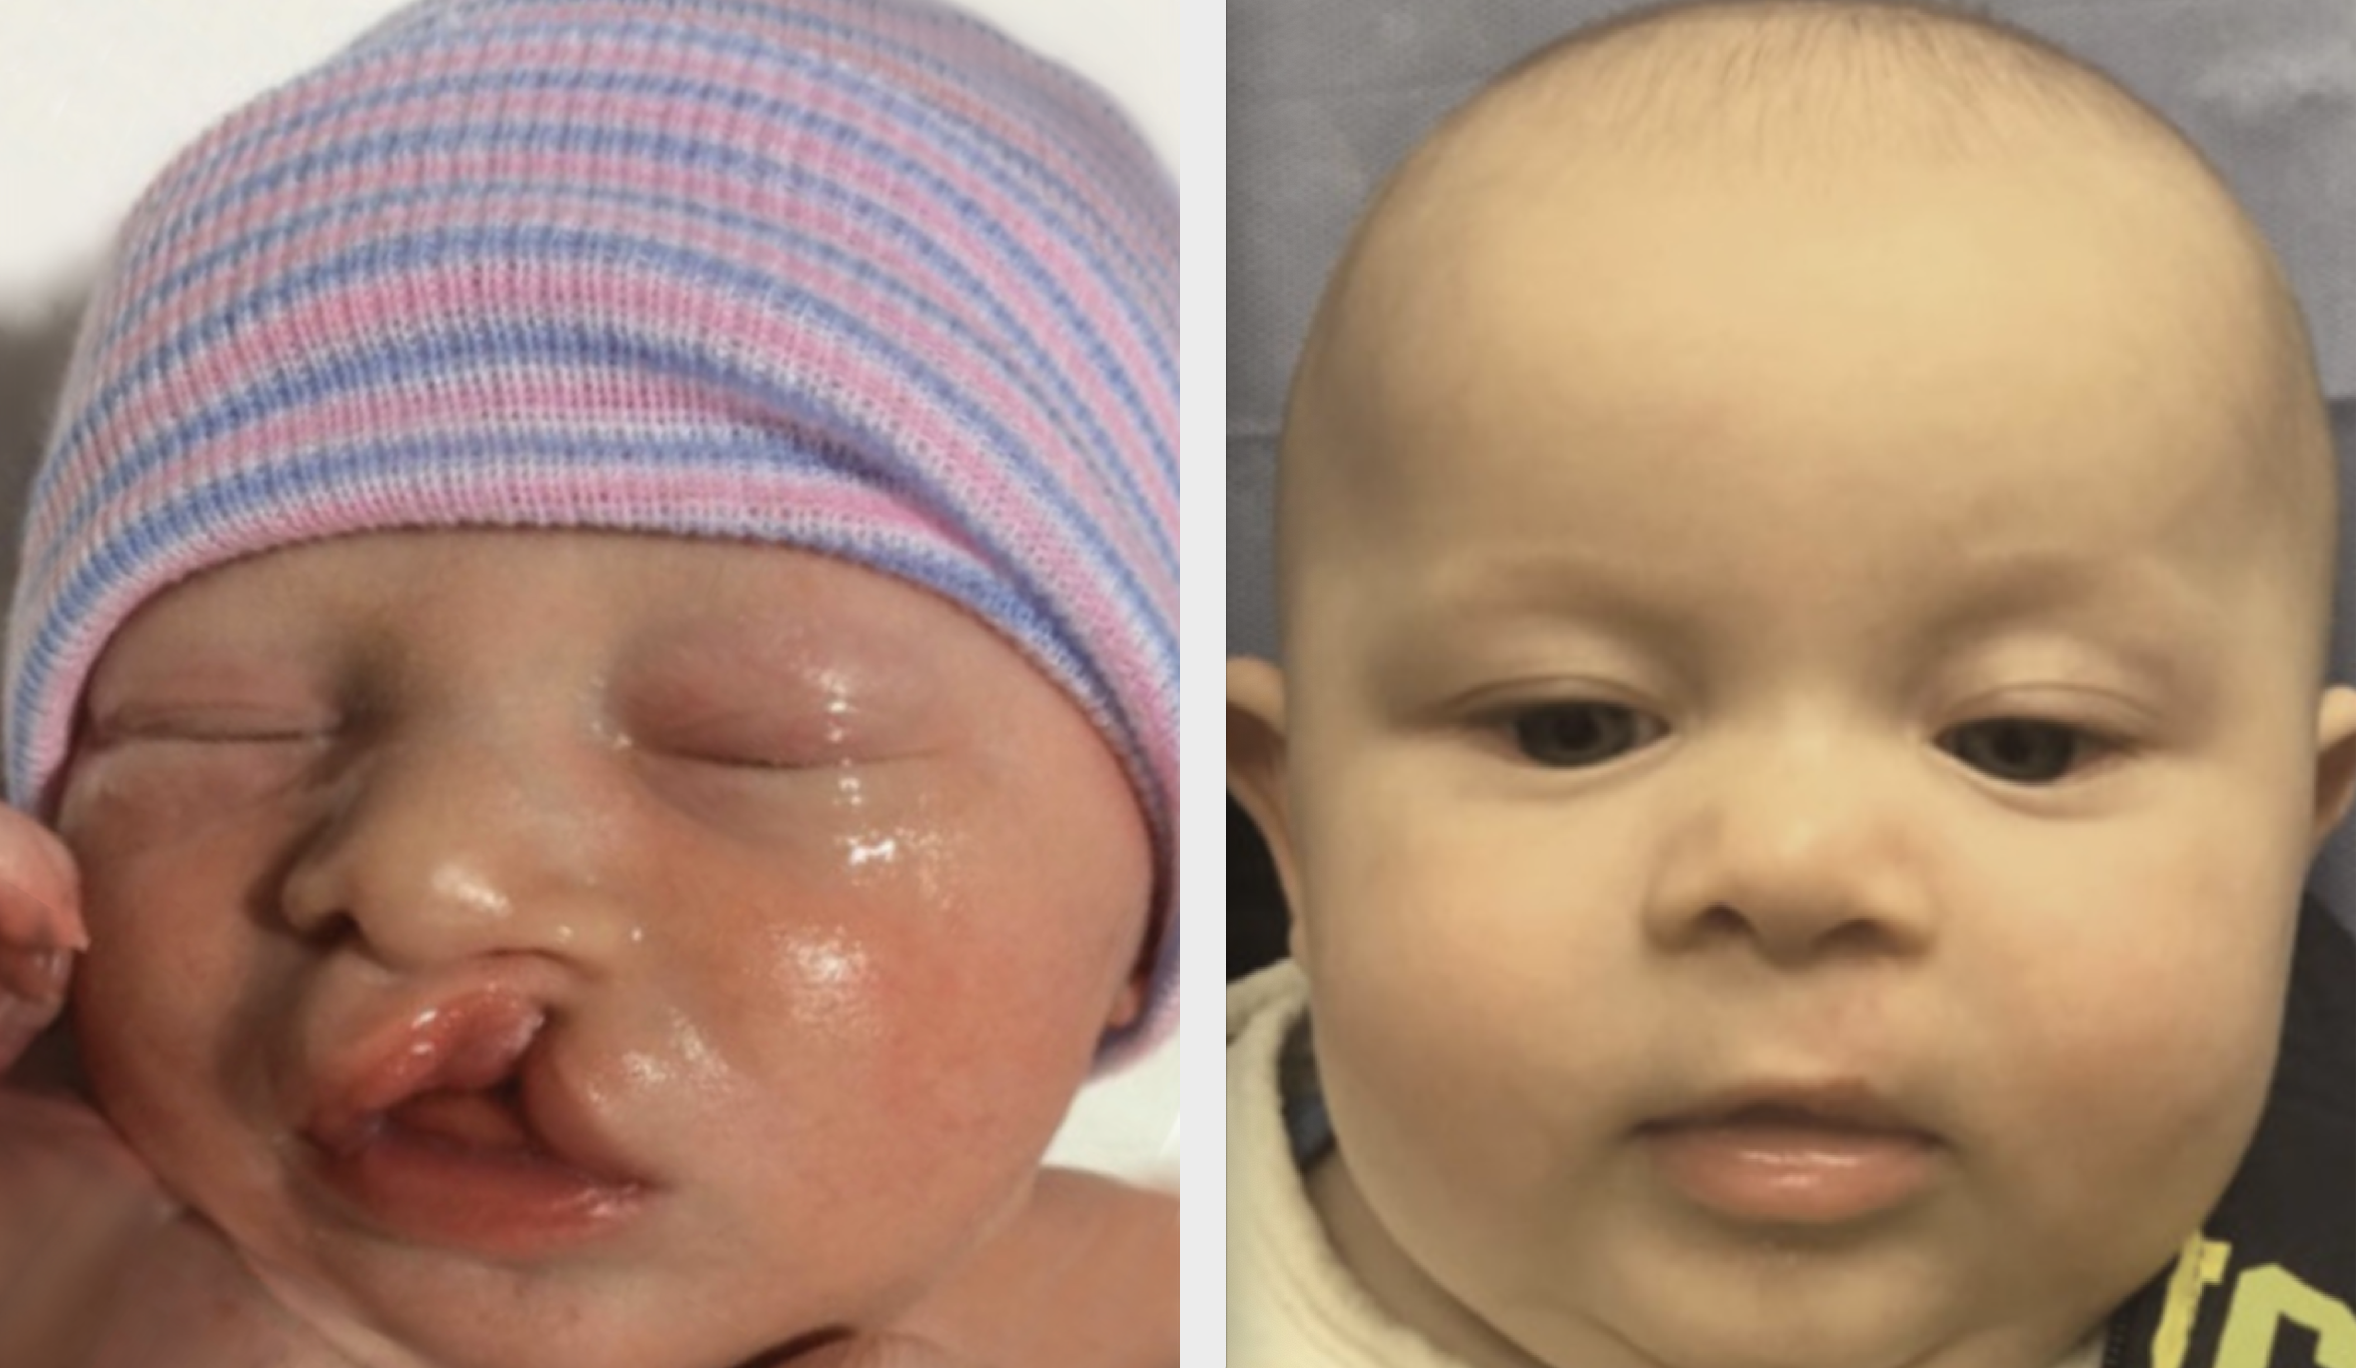 A patient of Dr. Hammoudeh who underwent ECLR at 2 weeks of age, pictured on the right 4 months after surgery.